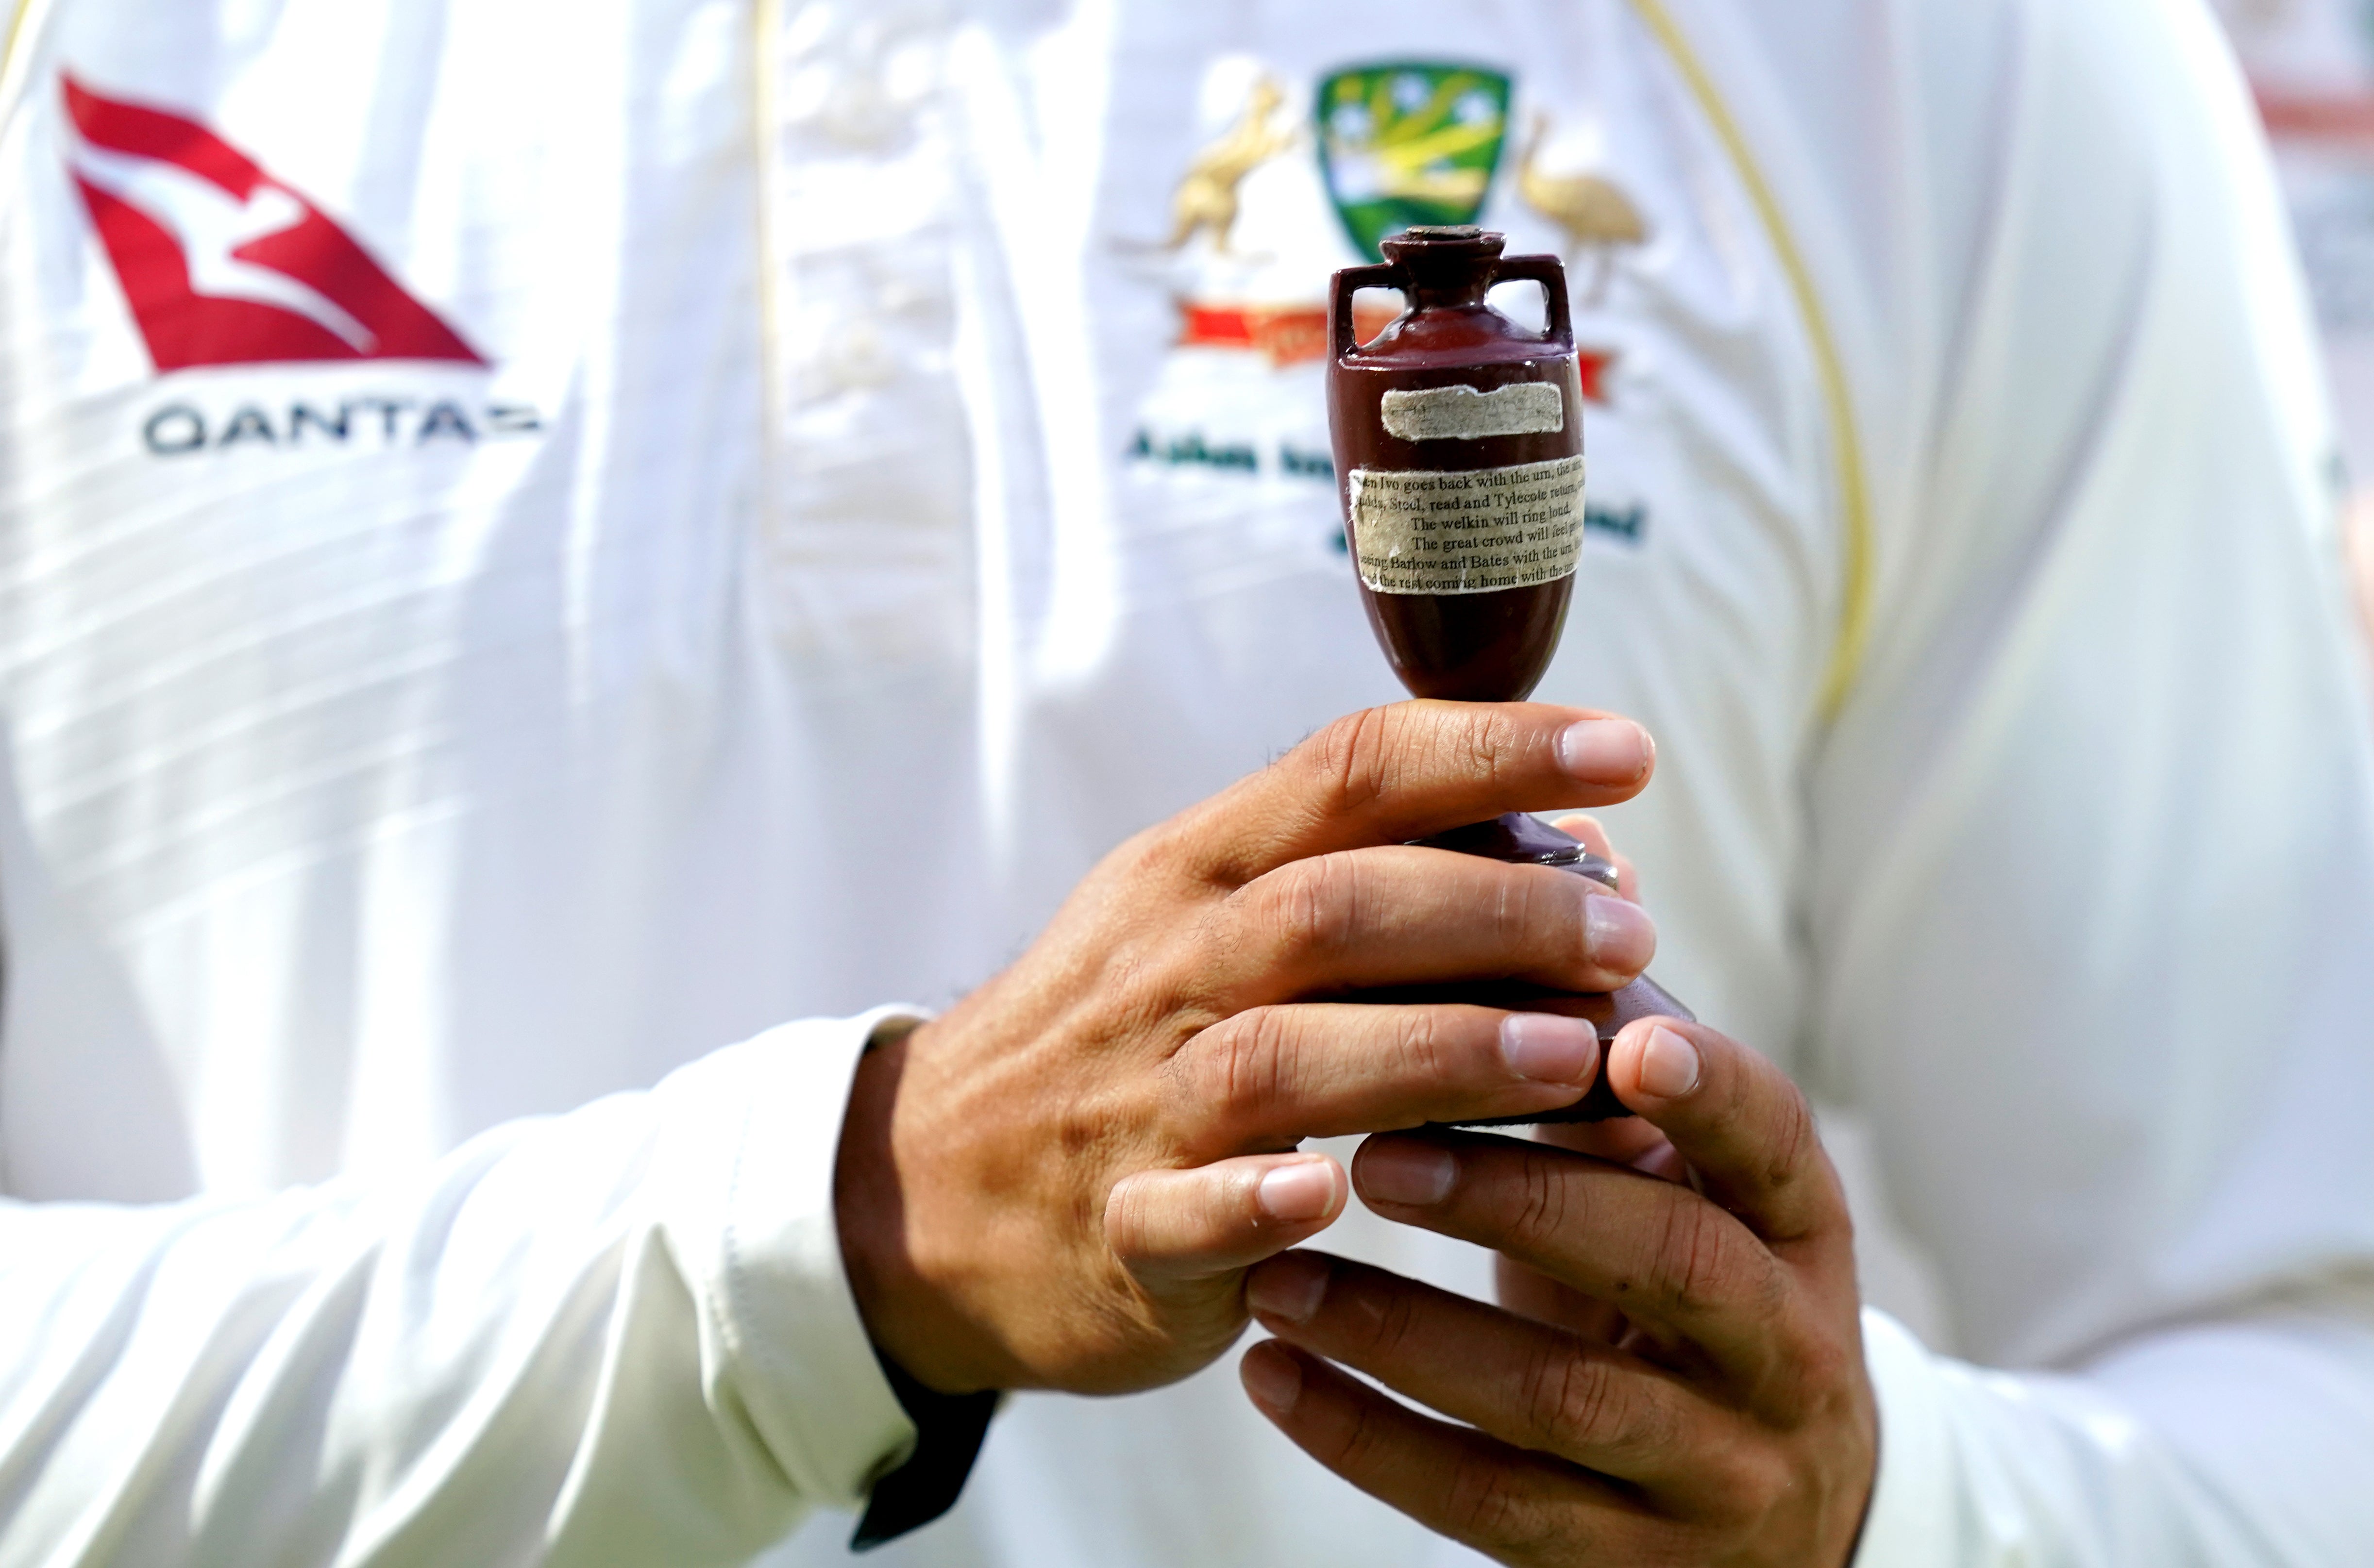 The ECB will meet later this week to decide whether the Ashes tour will go ahead